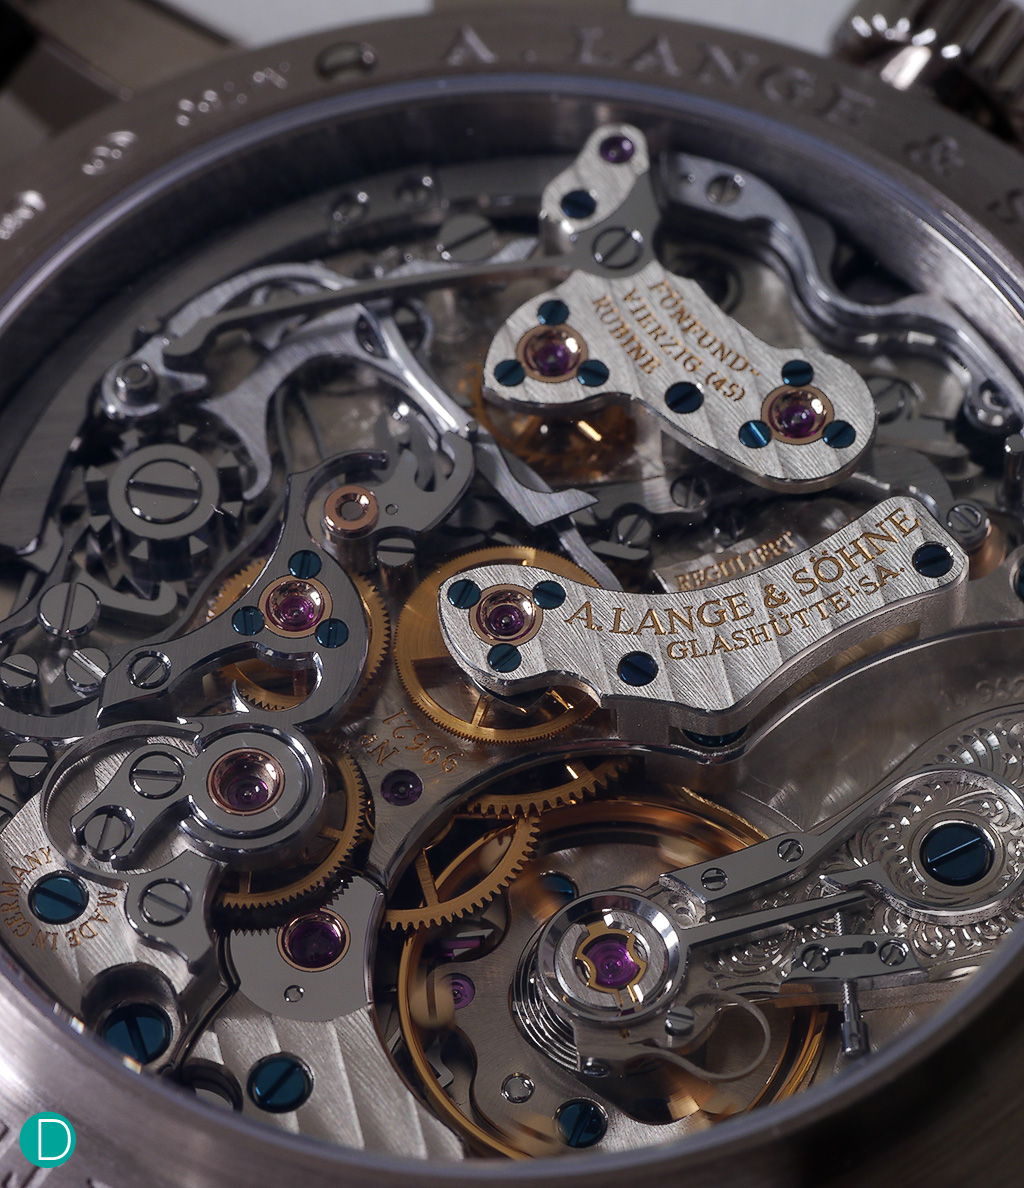 Movement is the exctptional Datograph based L952.1, with a perpetual calendar plate. 